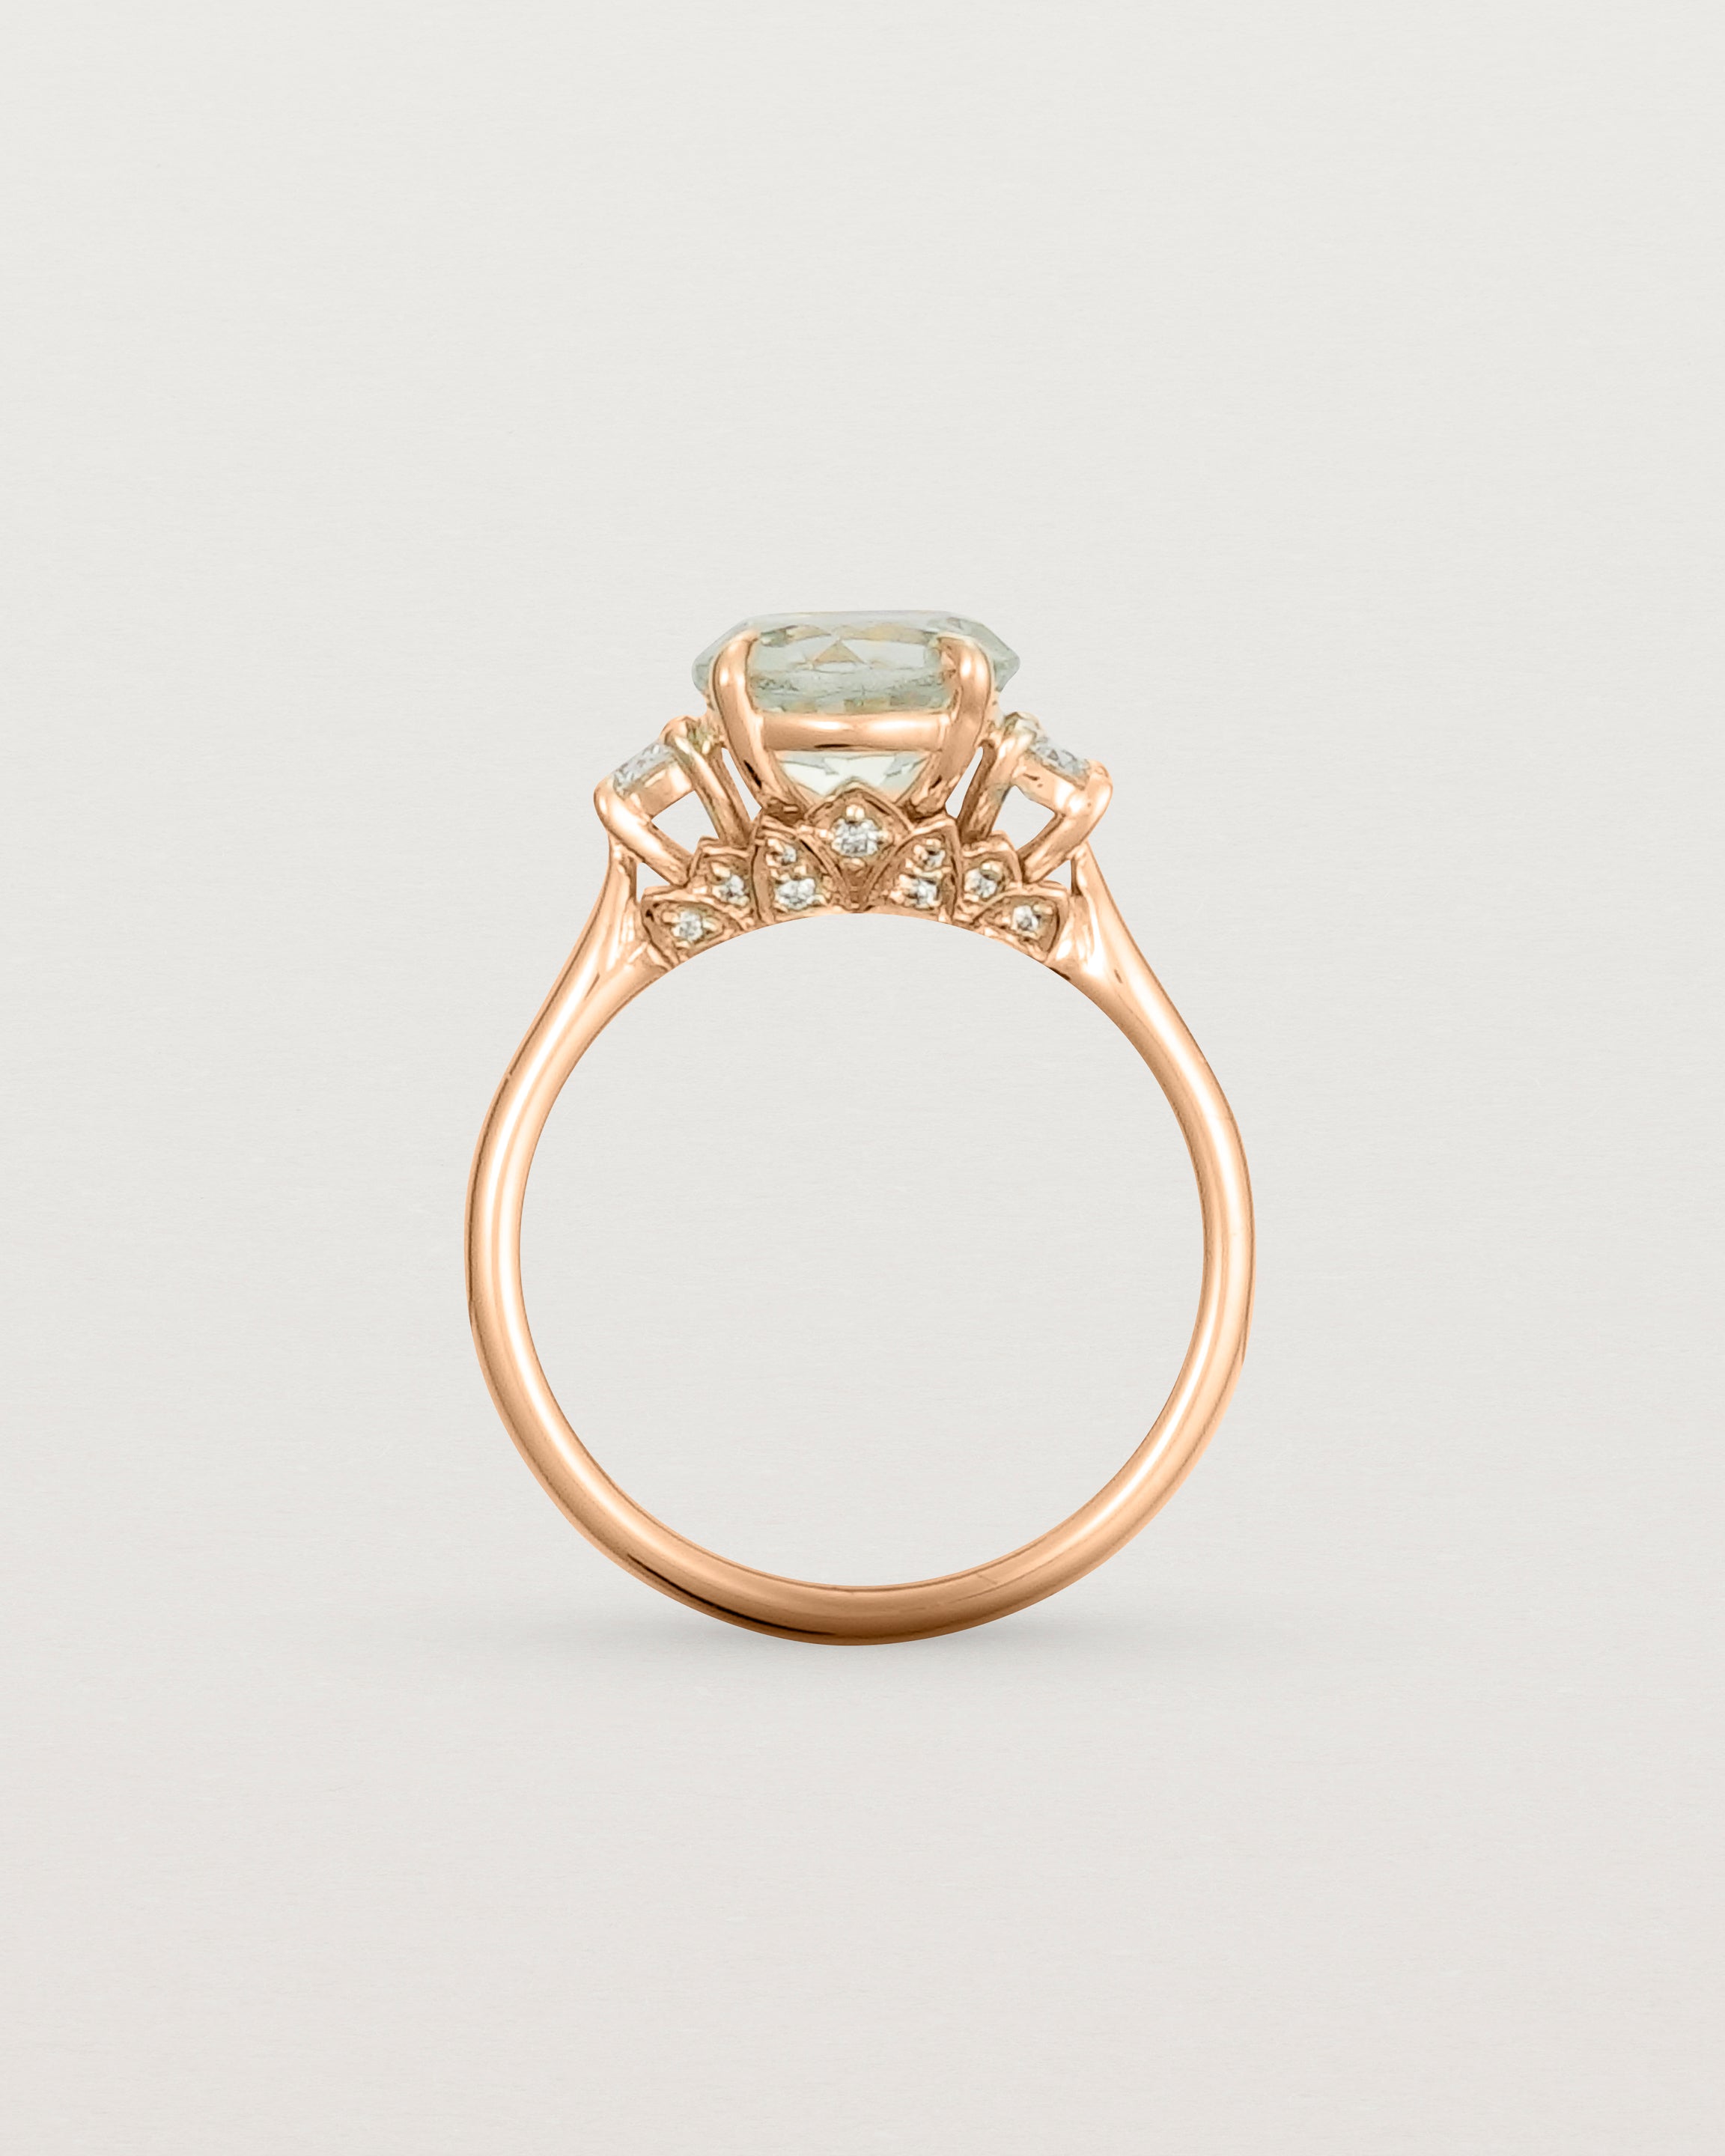 Standing view of the Laurel Round Trio Ring | Green Amethyst | Rose Gold.